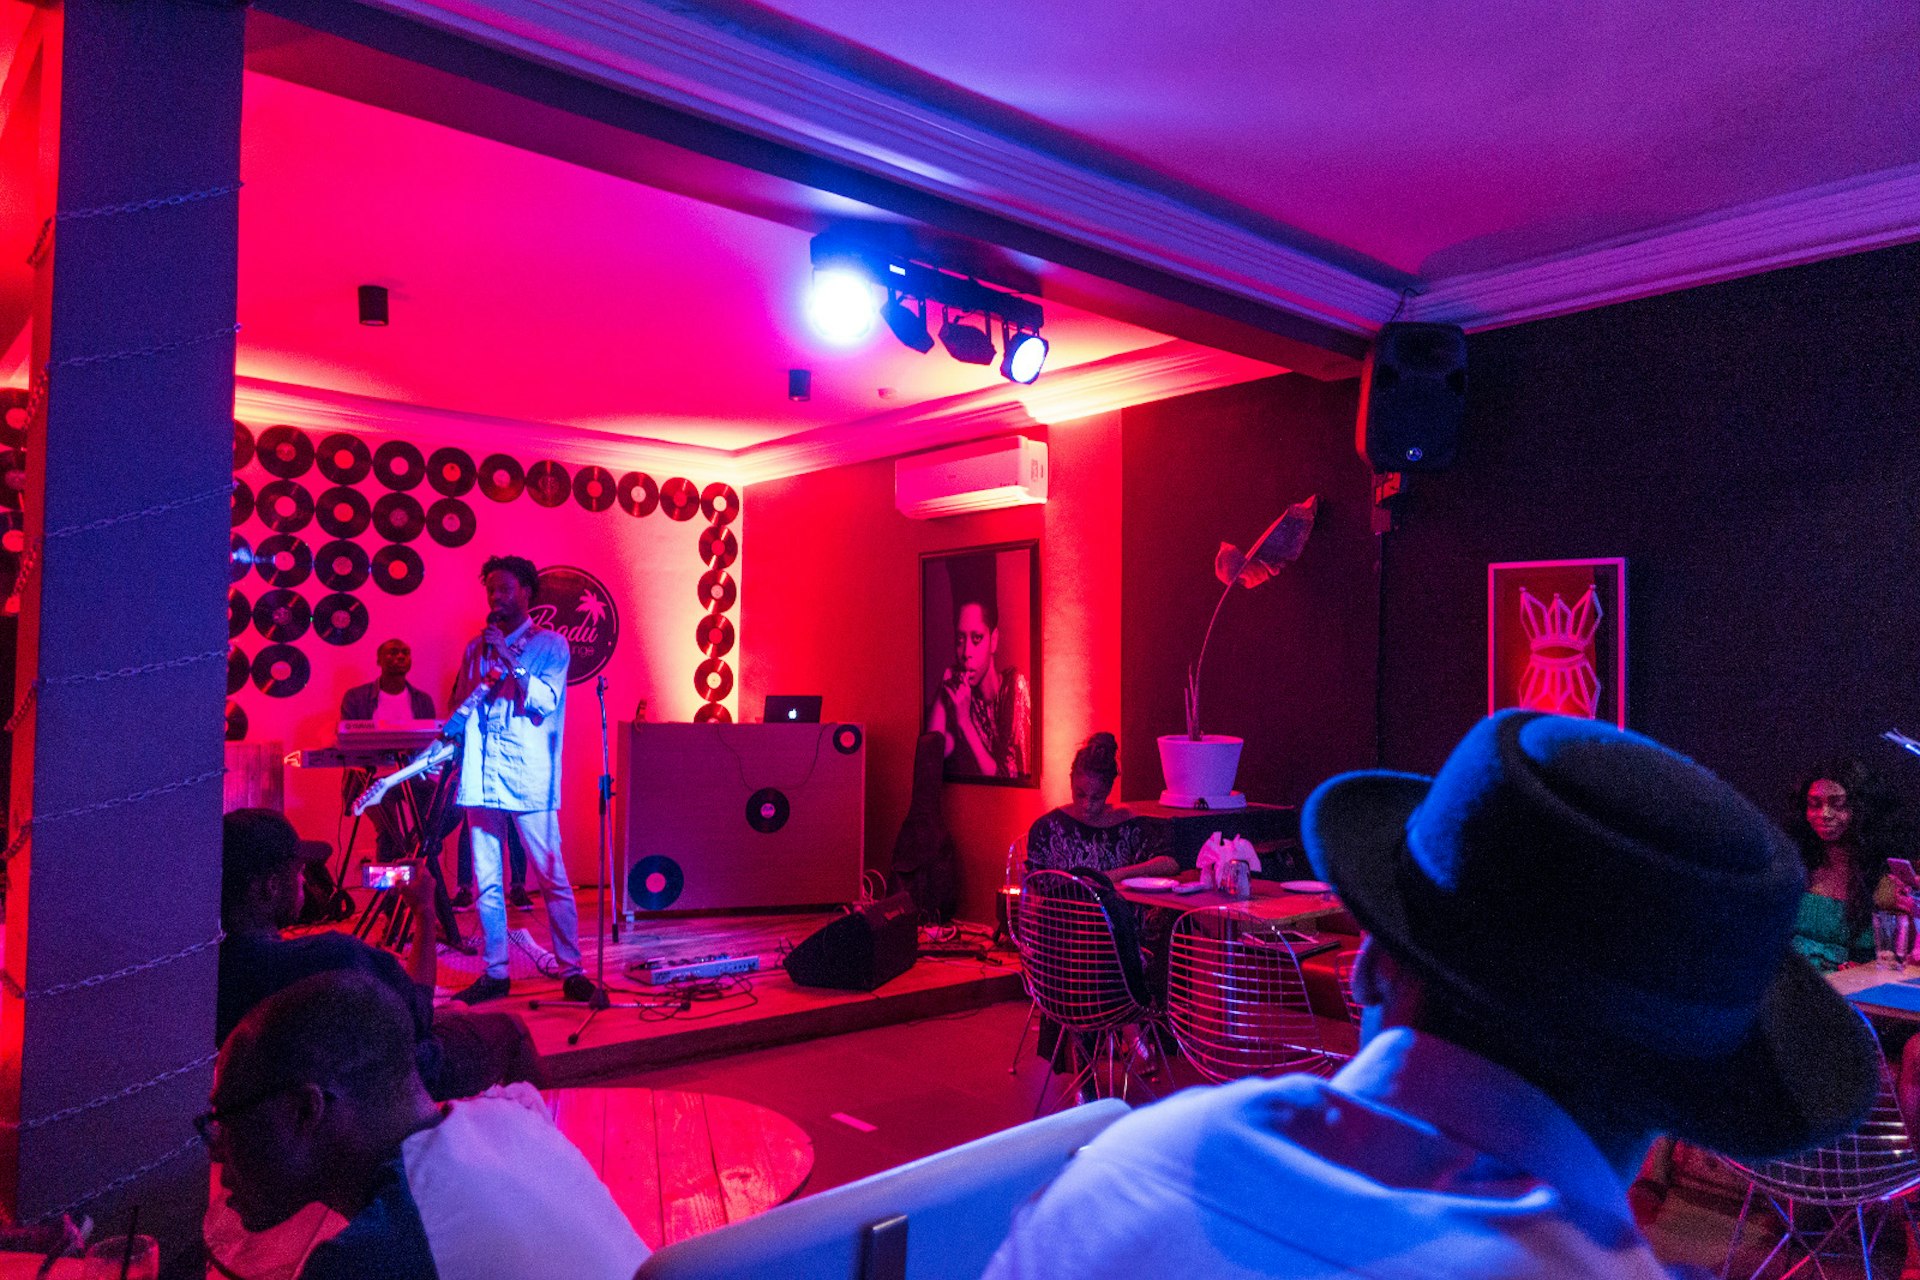 A small stage and room glow red, with a singer on stage holding a guitar and microphone. The back wall of the stage is decorated with a pattern of old vinyl records © Elio Stamm / Lonely Planet